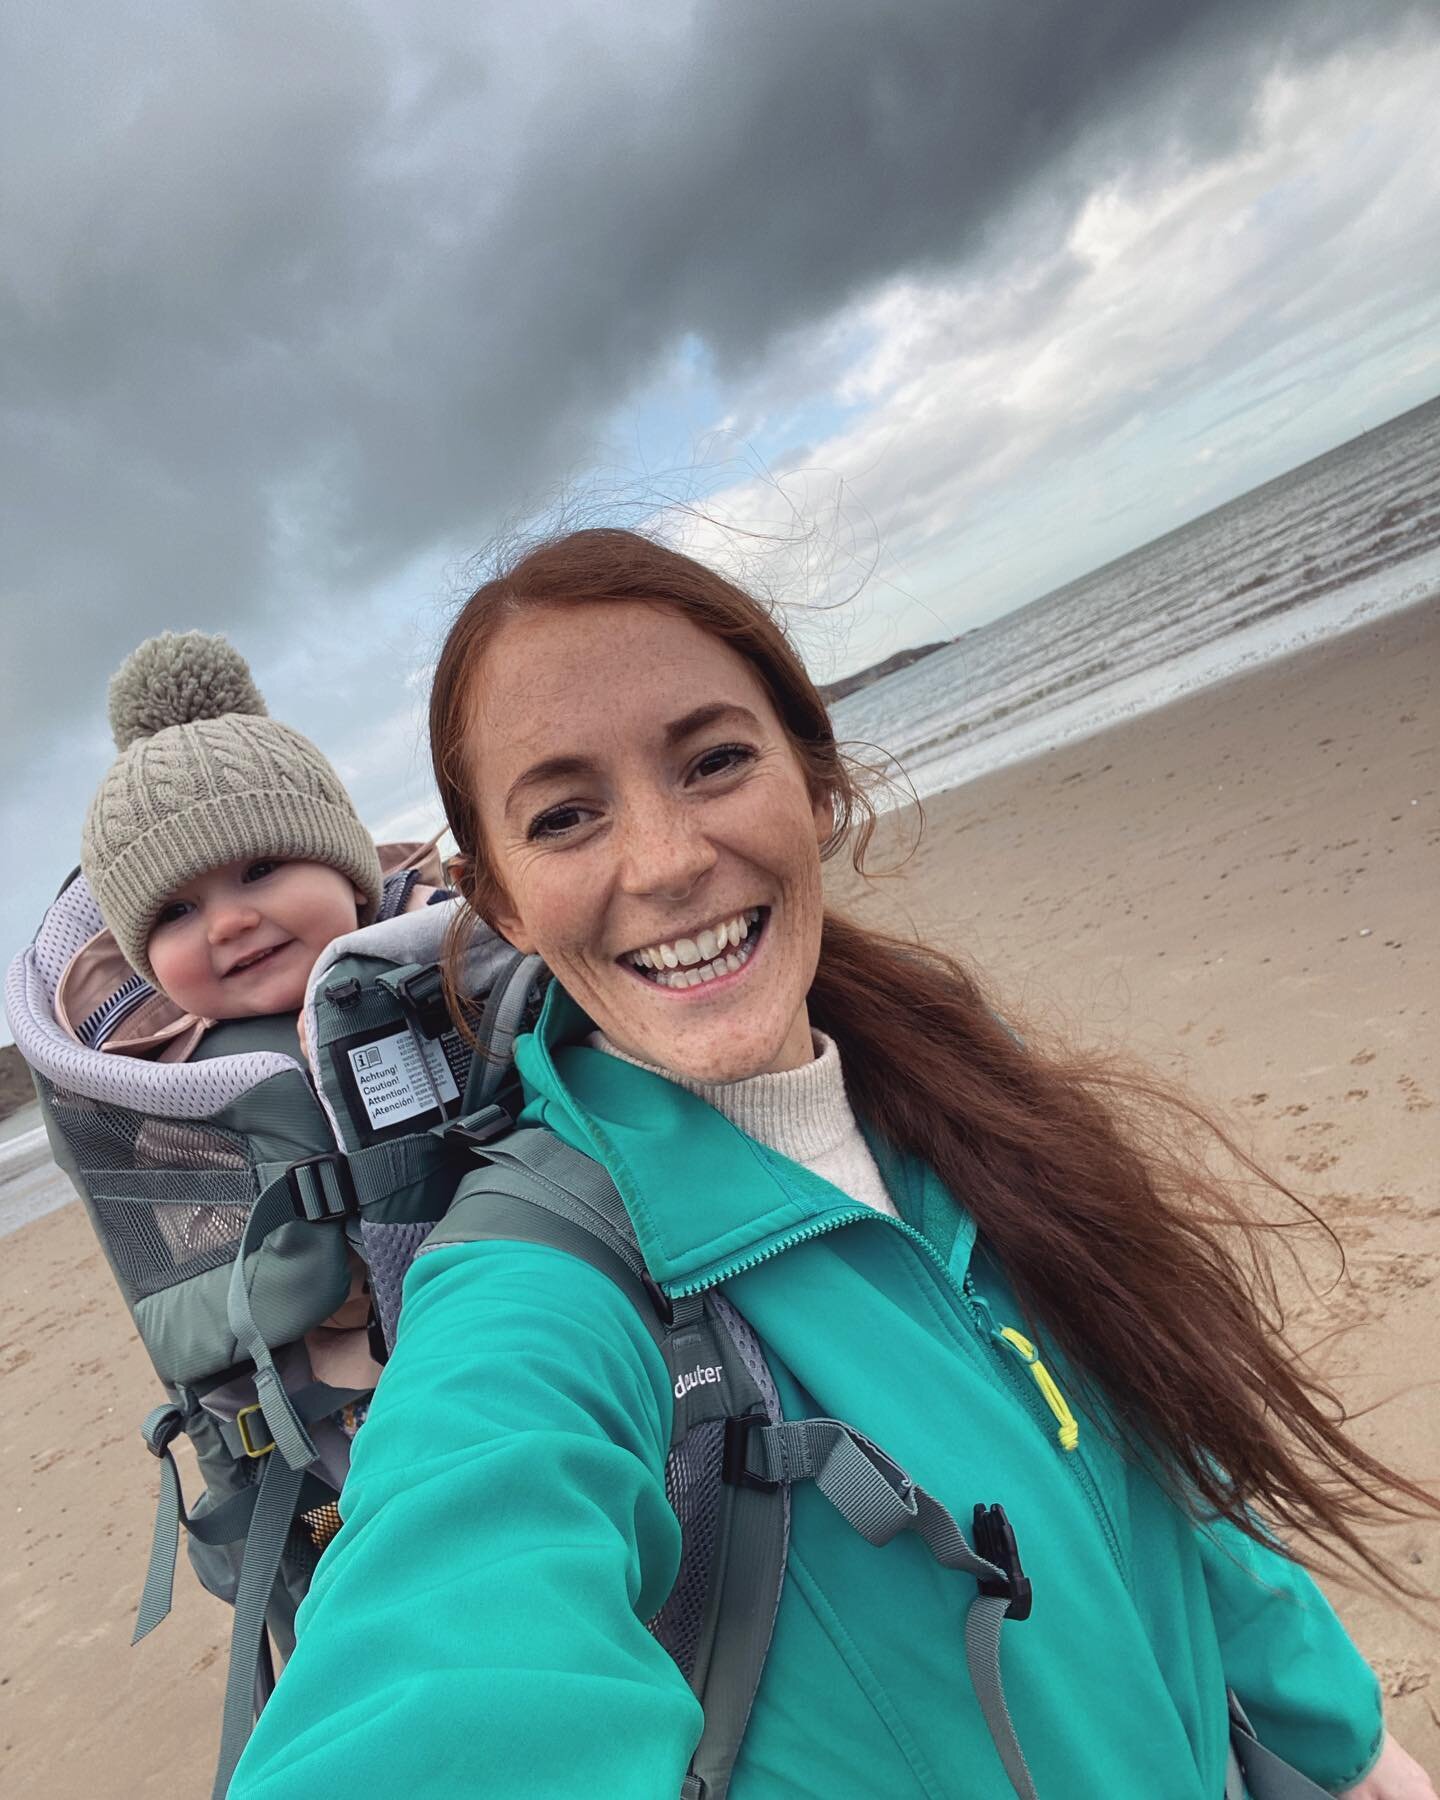 Weekends don&rsquo;t get much better than this 🙌

A gorgeous weekend on the Llyn Peninsula with my besties! My cup is feeling very full right now 🫶

It was very windy on the Saturday - and Lily wasn&rsquo;t enjoying being in the backpack. So we abo